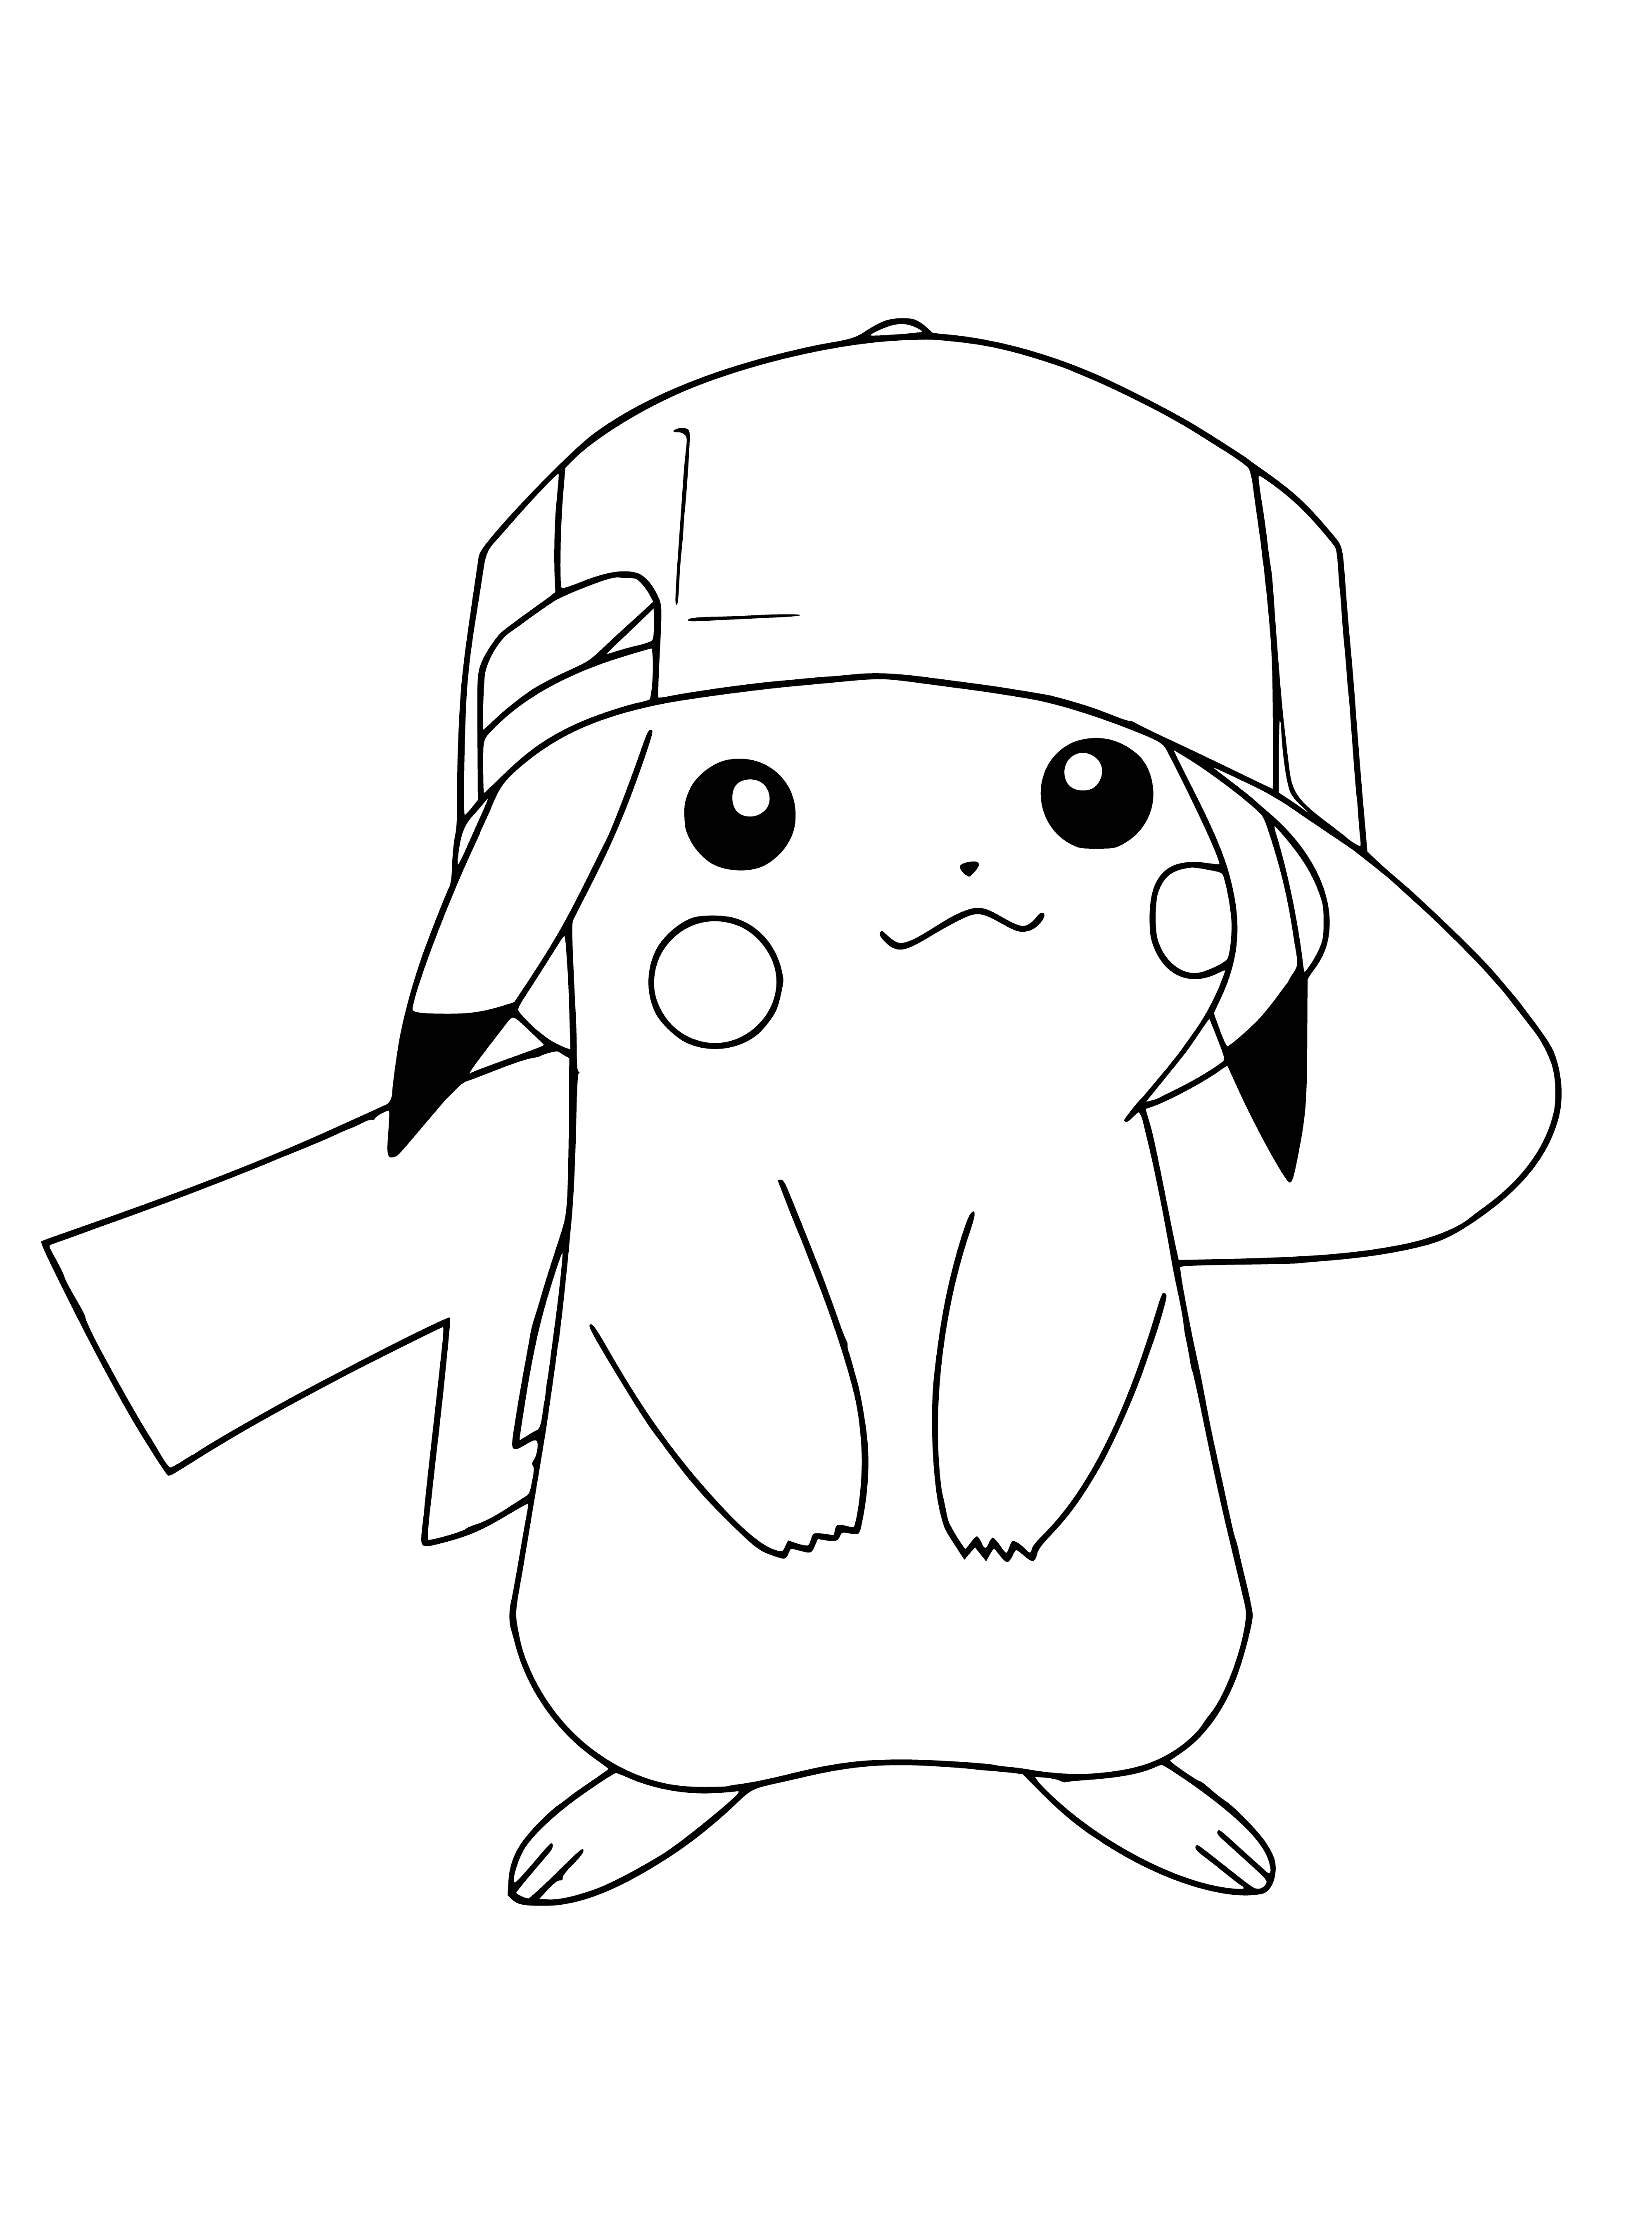 coloring page: Adorable mouse-like creature w/ yellow fur, black markings, lighting bolt-shaped tail, & wearing red & white Pokeball adorned baseball cap.